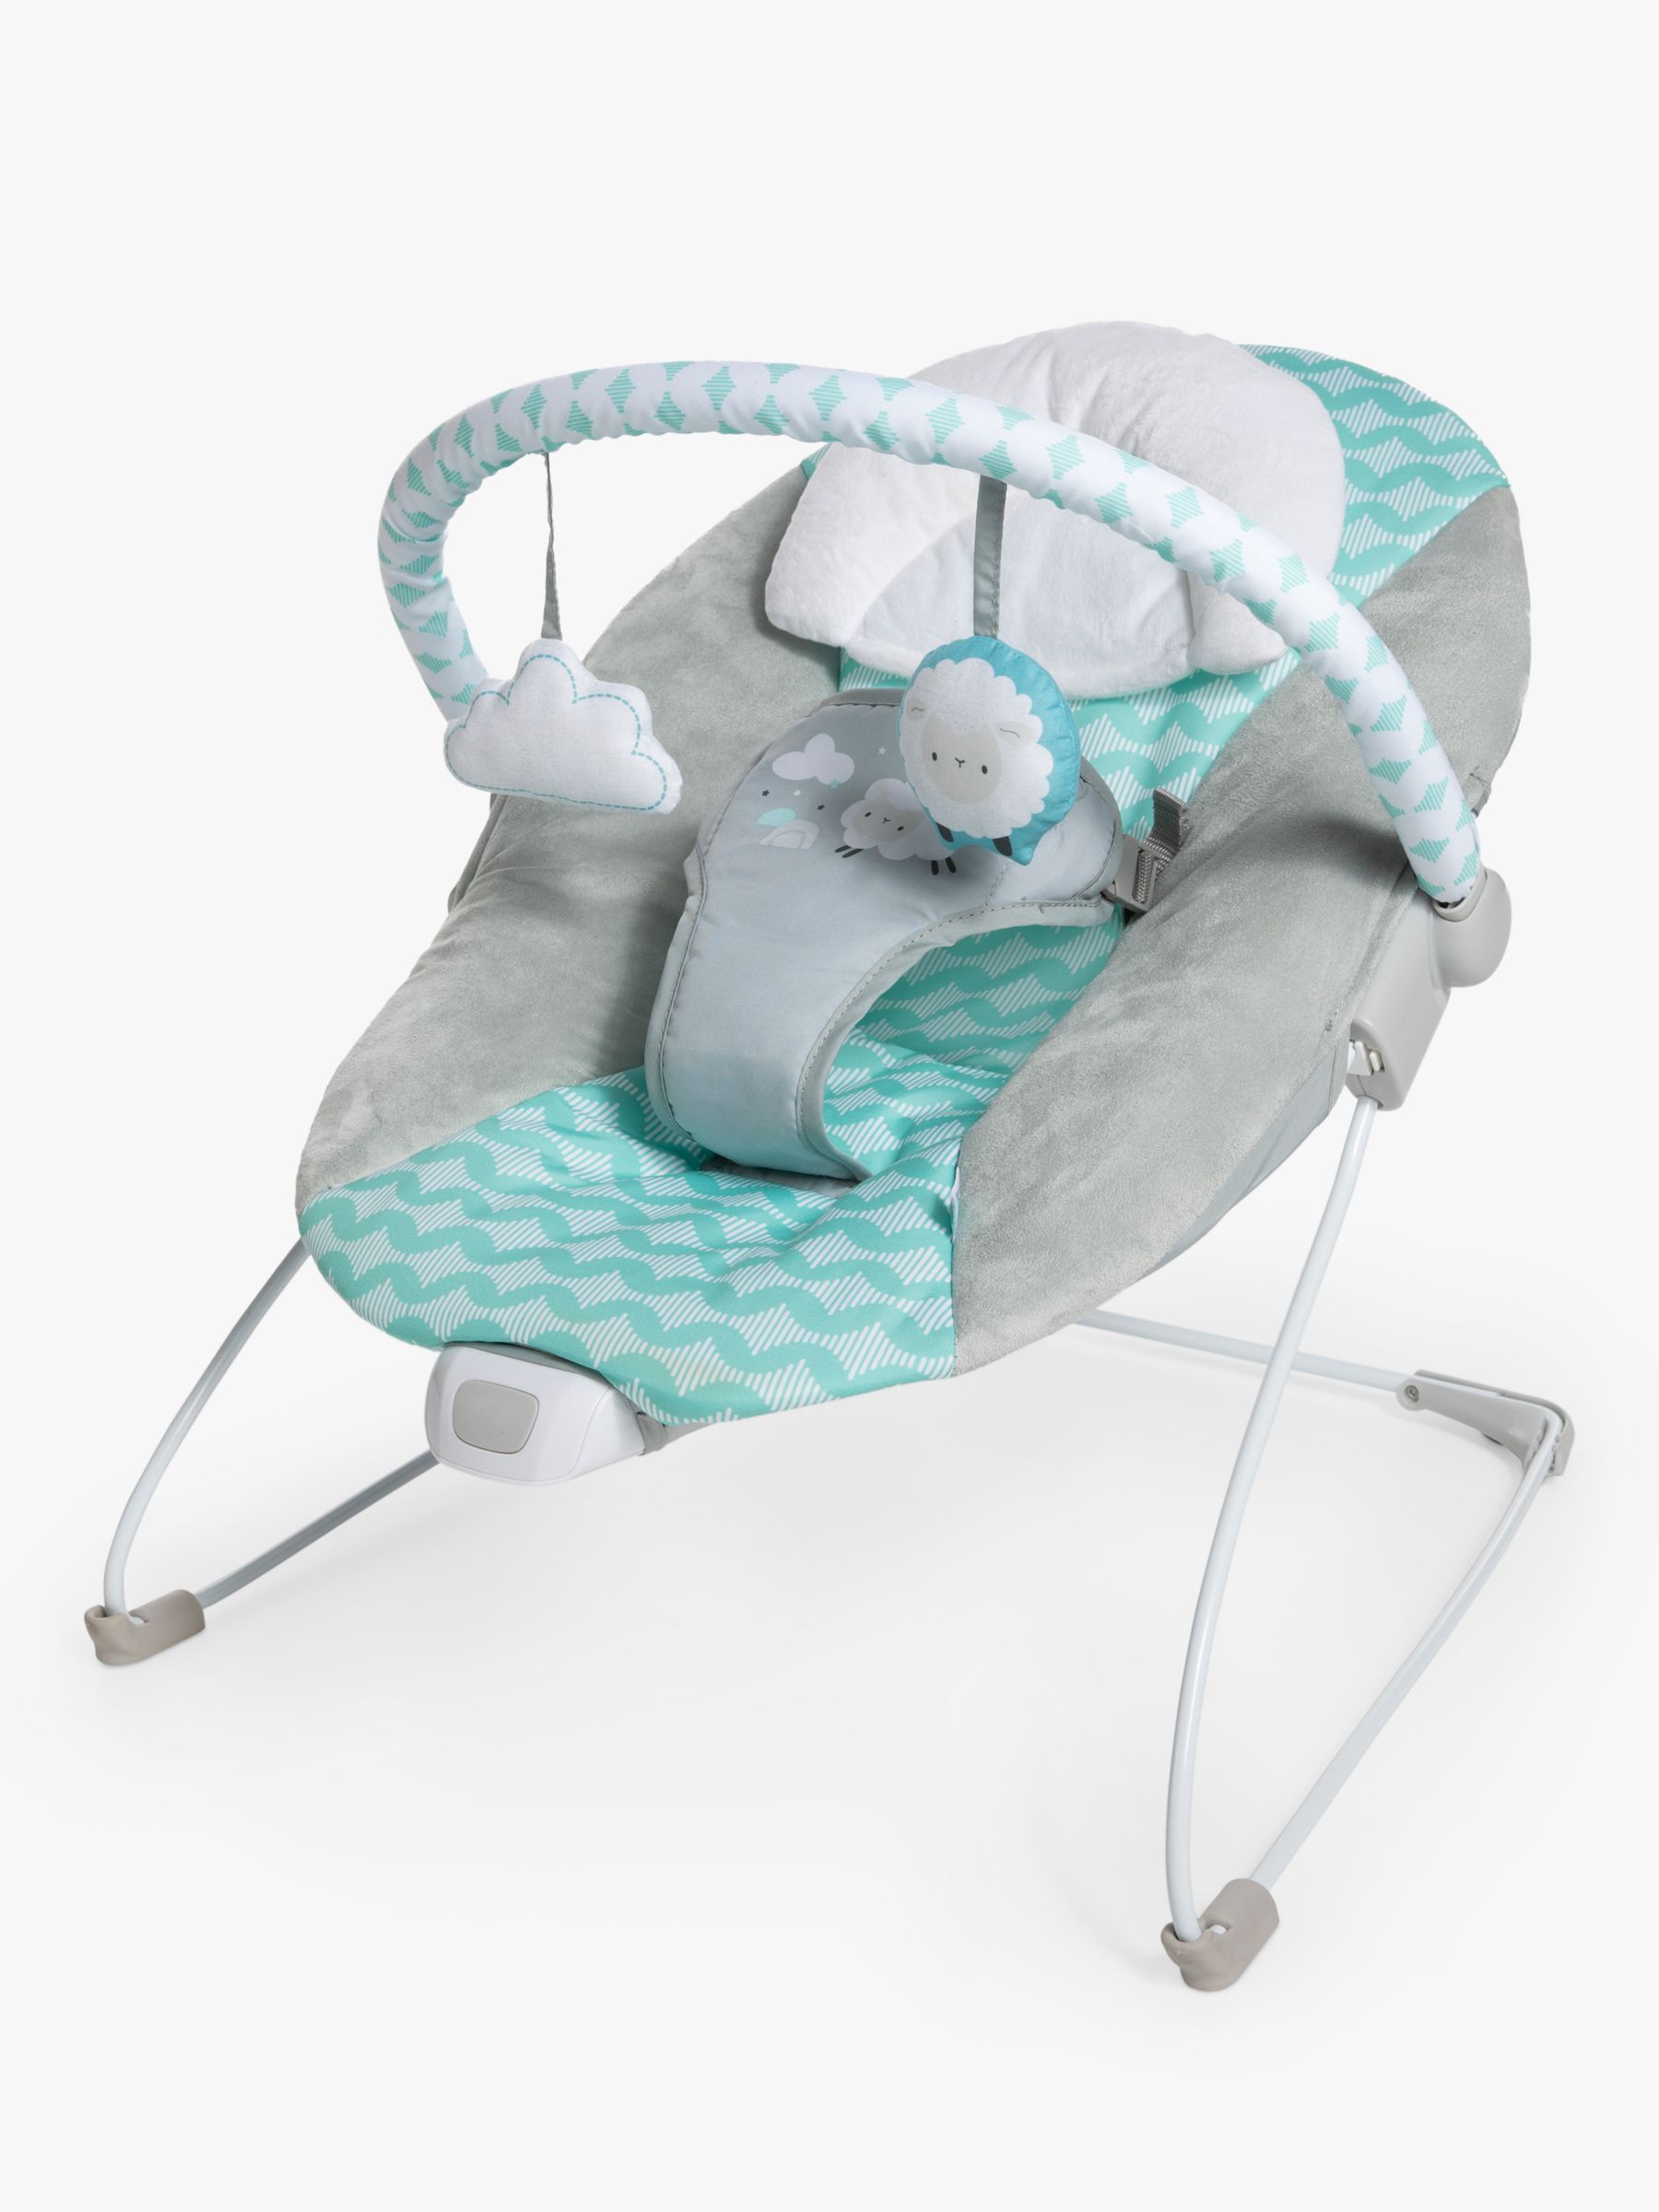 Automatic Bouncer for Newborn Electric Infants Rocker Swing Chair with Music,Vibrate Rocking Seat Sleeper Shipment from USA, Multicolour Portable Baby Swing Cradle 